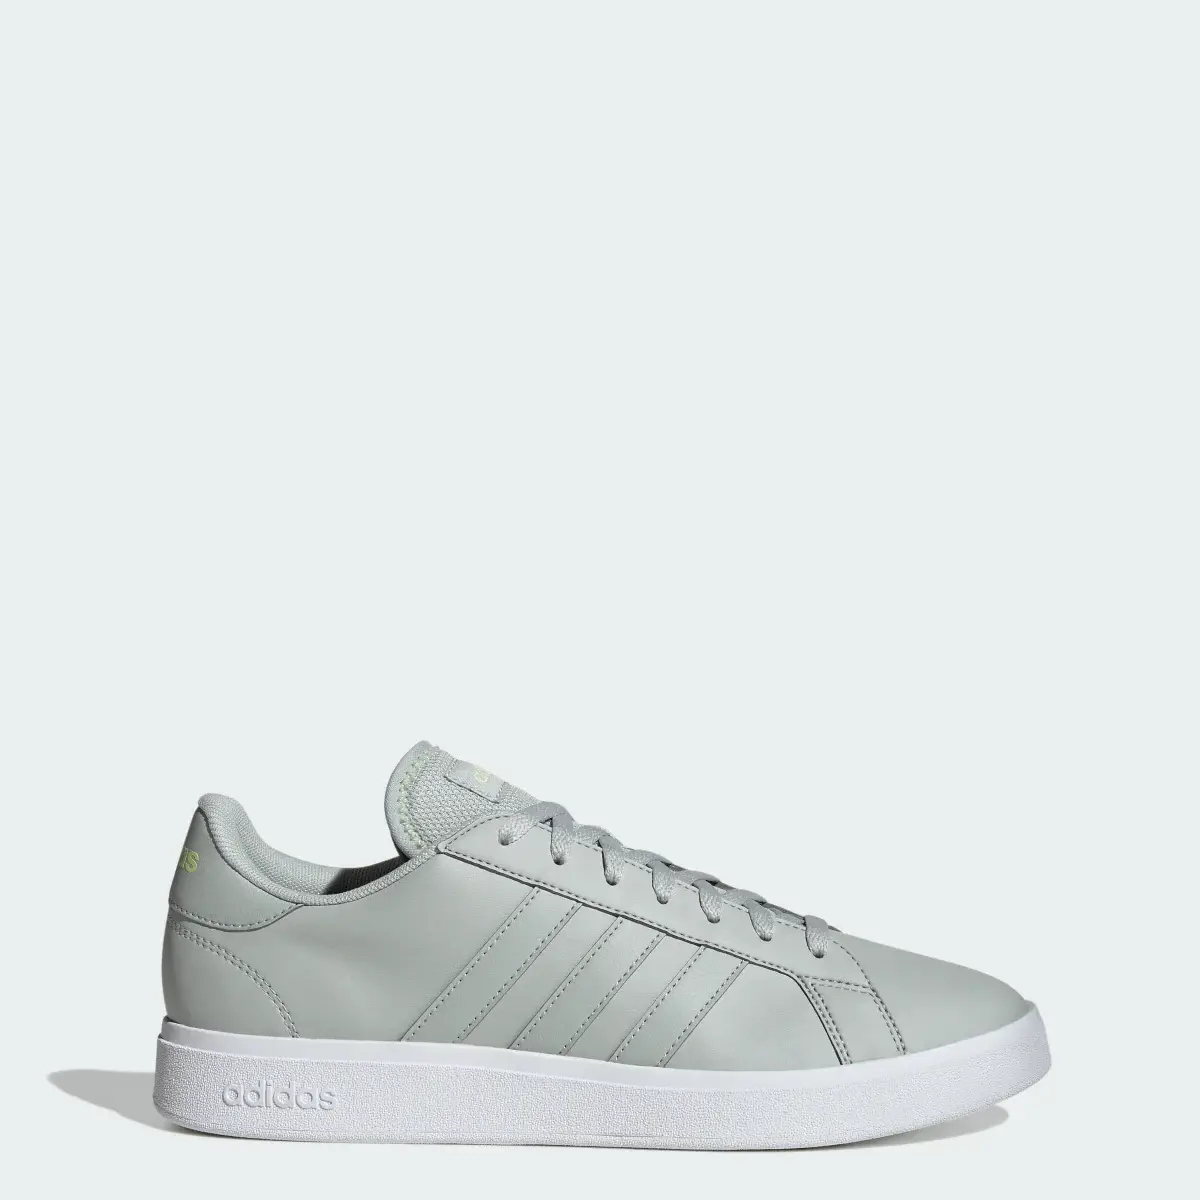 Adidas Tenis adidas Grand Court TD Lifestyle Court Casual. 1